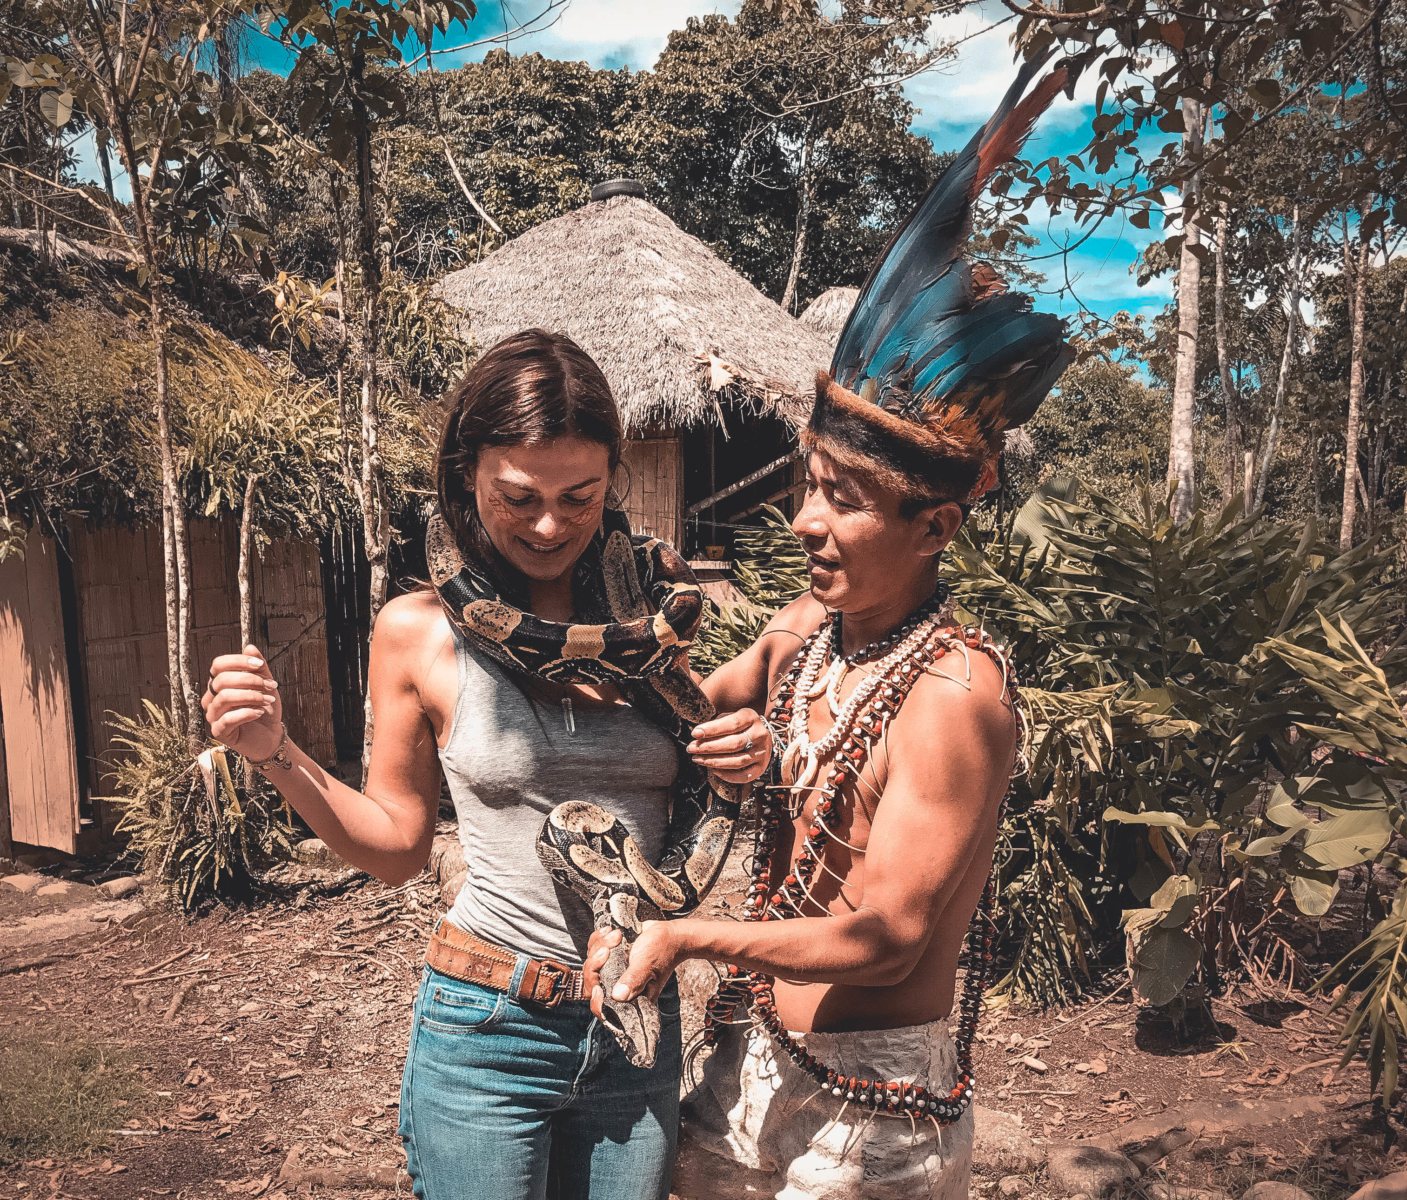 Indigenous people in the Amazonia